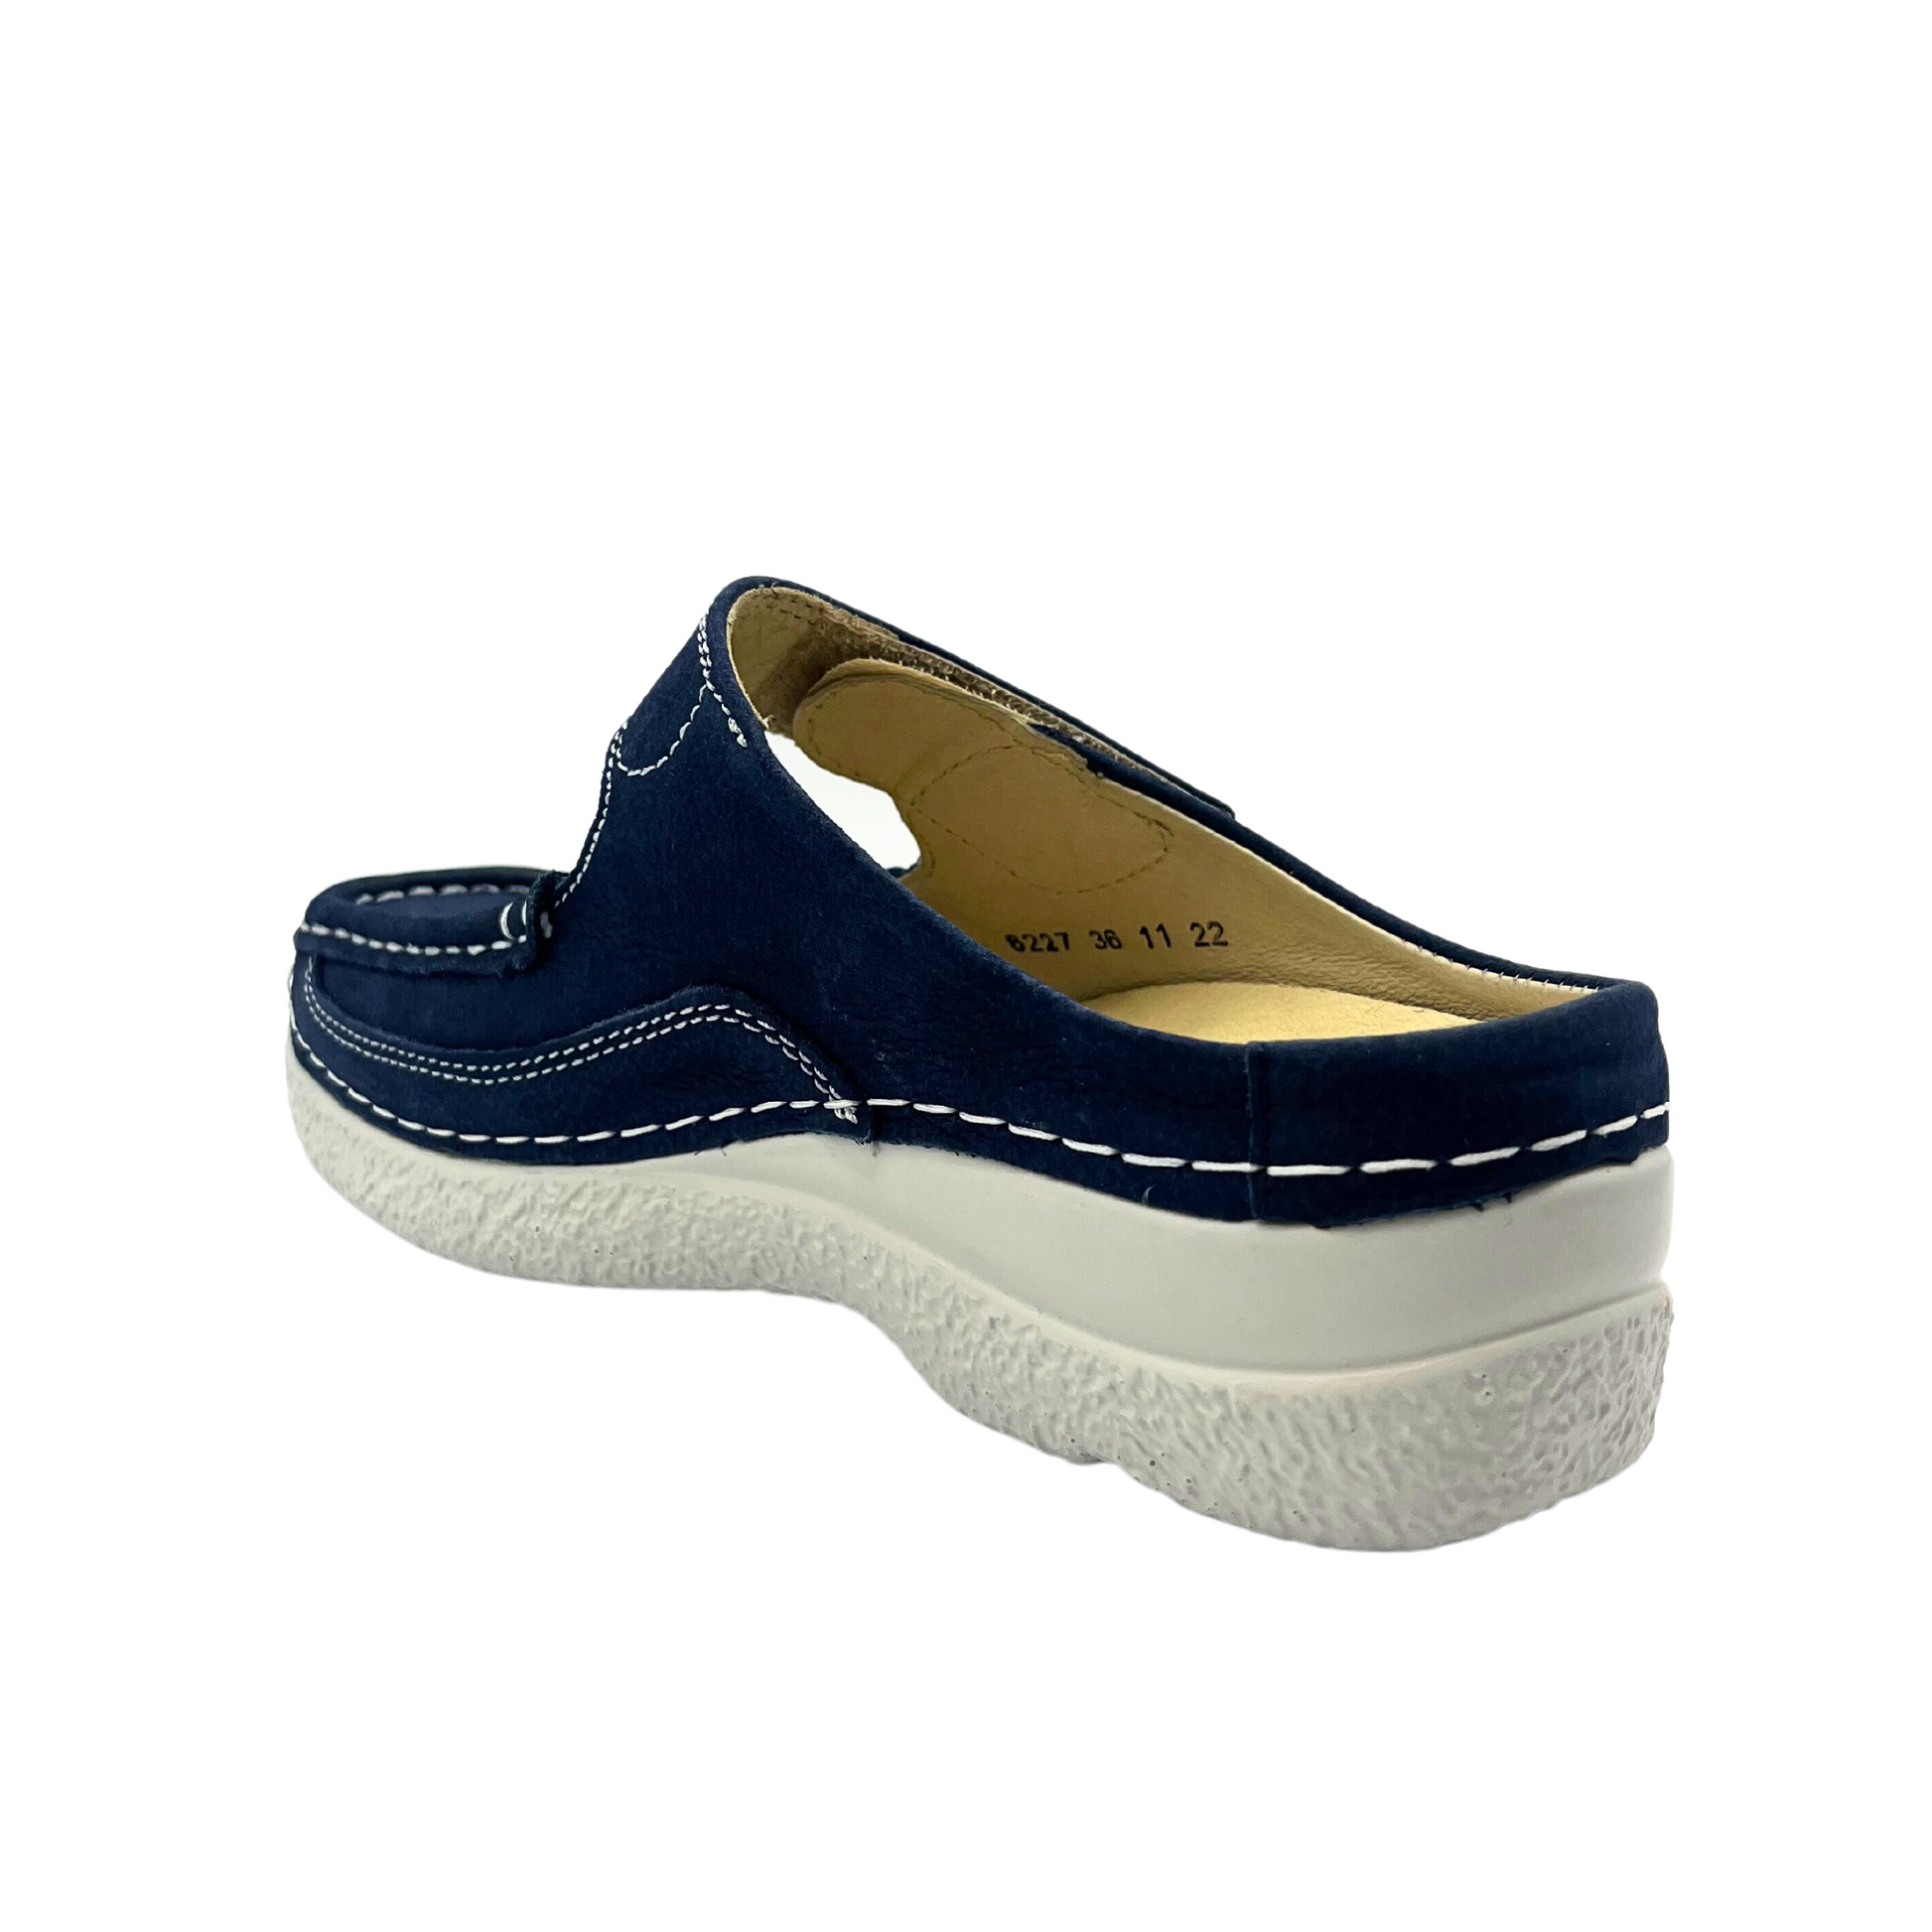 Angled back view of closed toe loafer with open heel.  Anatomically shaped footbed is removable.  Contrast white stitching against blue upper and white sole